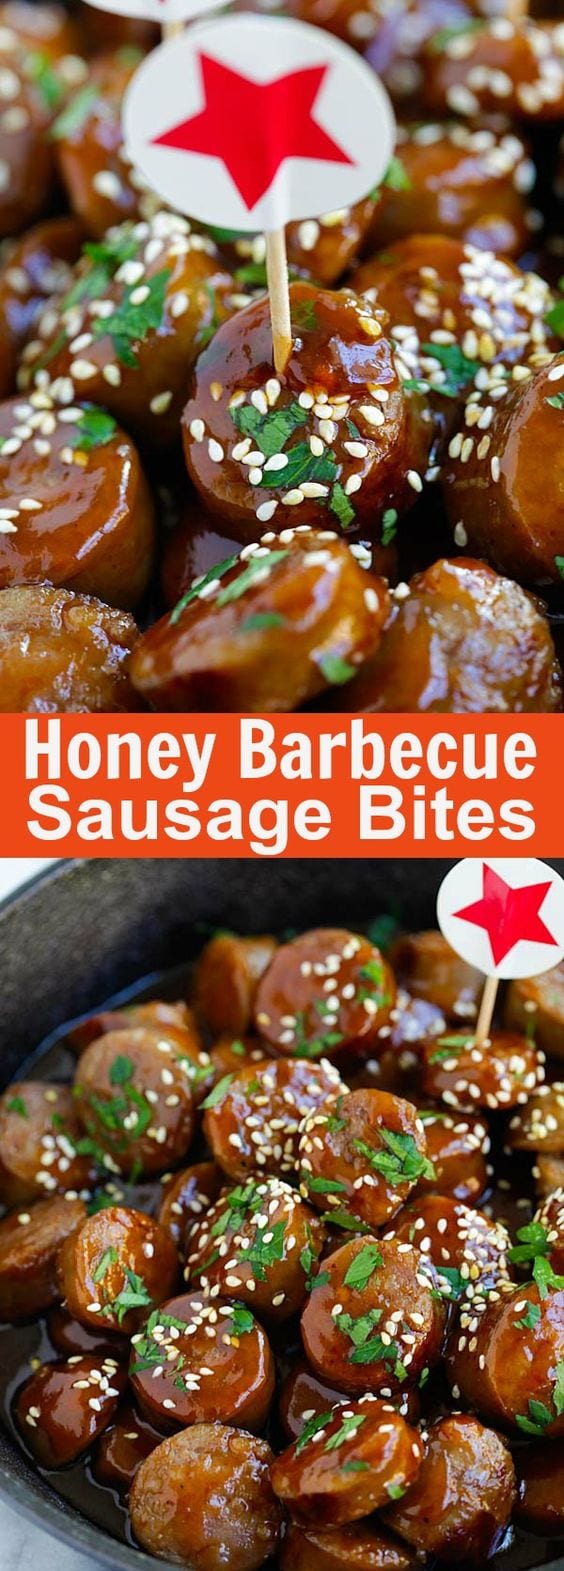 Honey Barbecue Sausage Bites - sausage bites in a sweet and sticky honey barbecue sauce. Crowd pleaser and perfect for any occasions | rasamalaysia.com